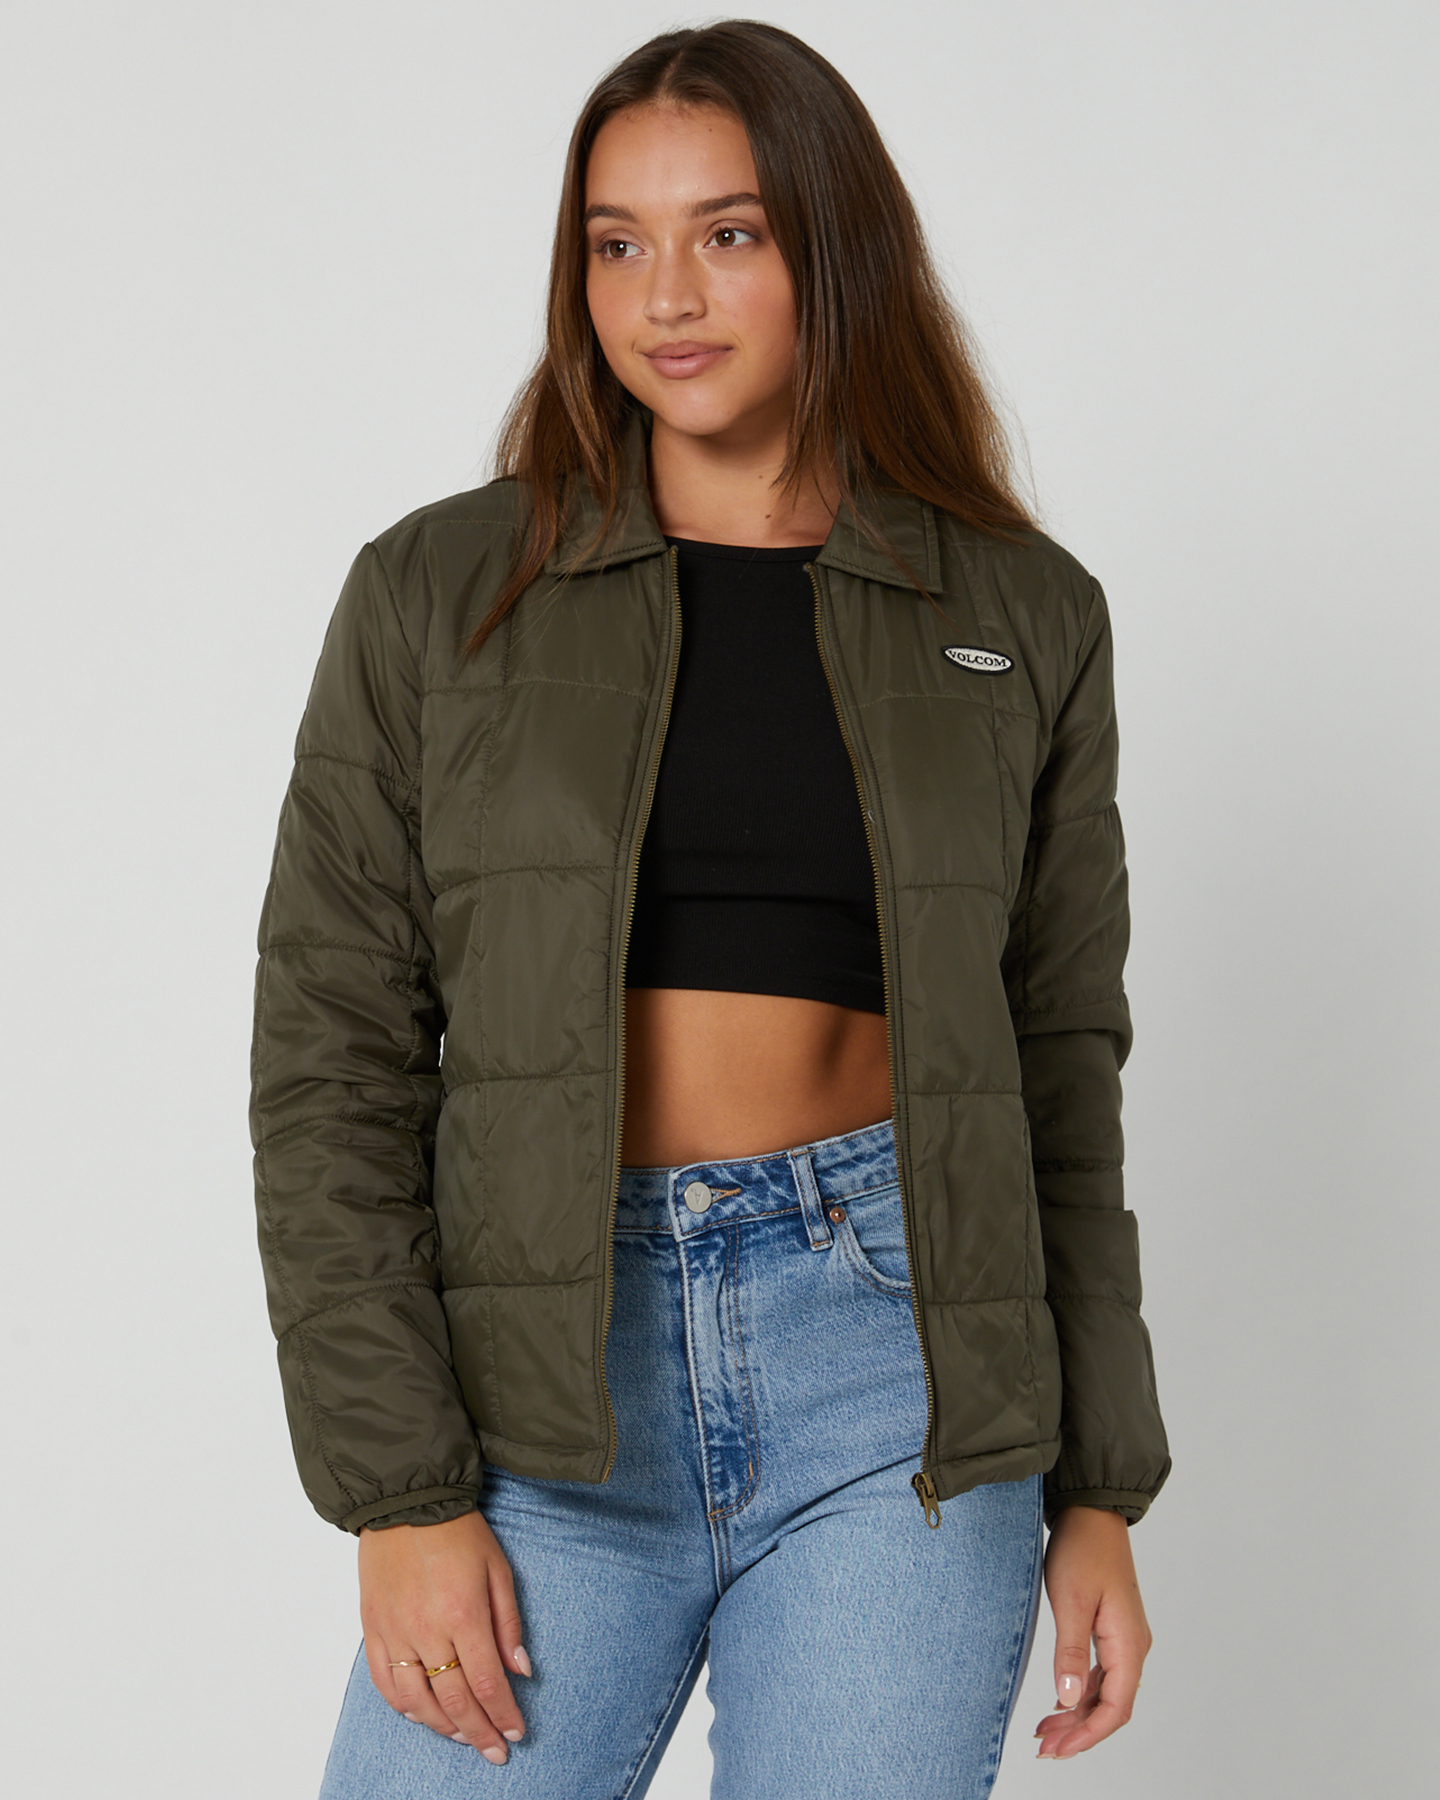 Volcom This That Them Jacket - Military | SurfStitch